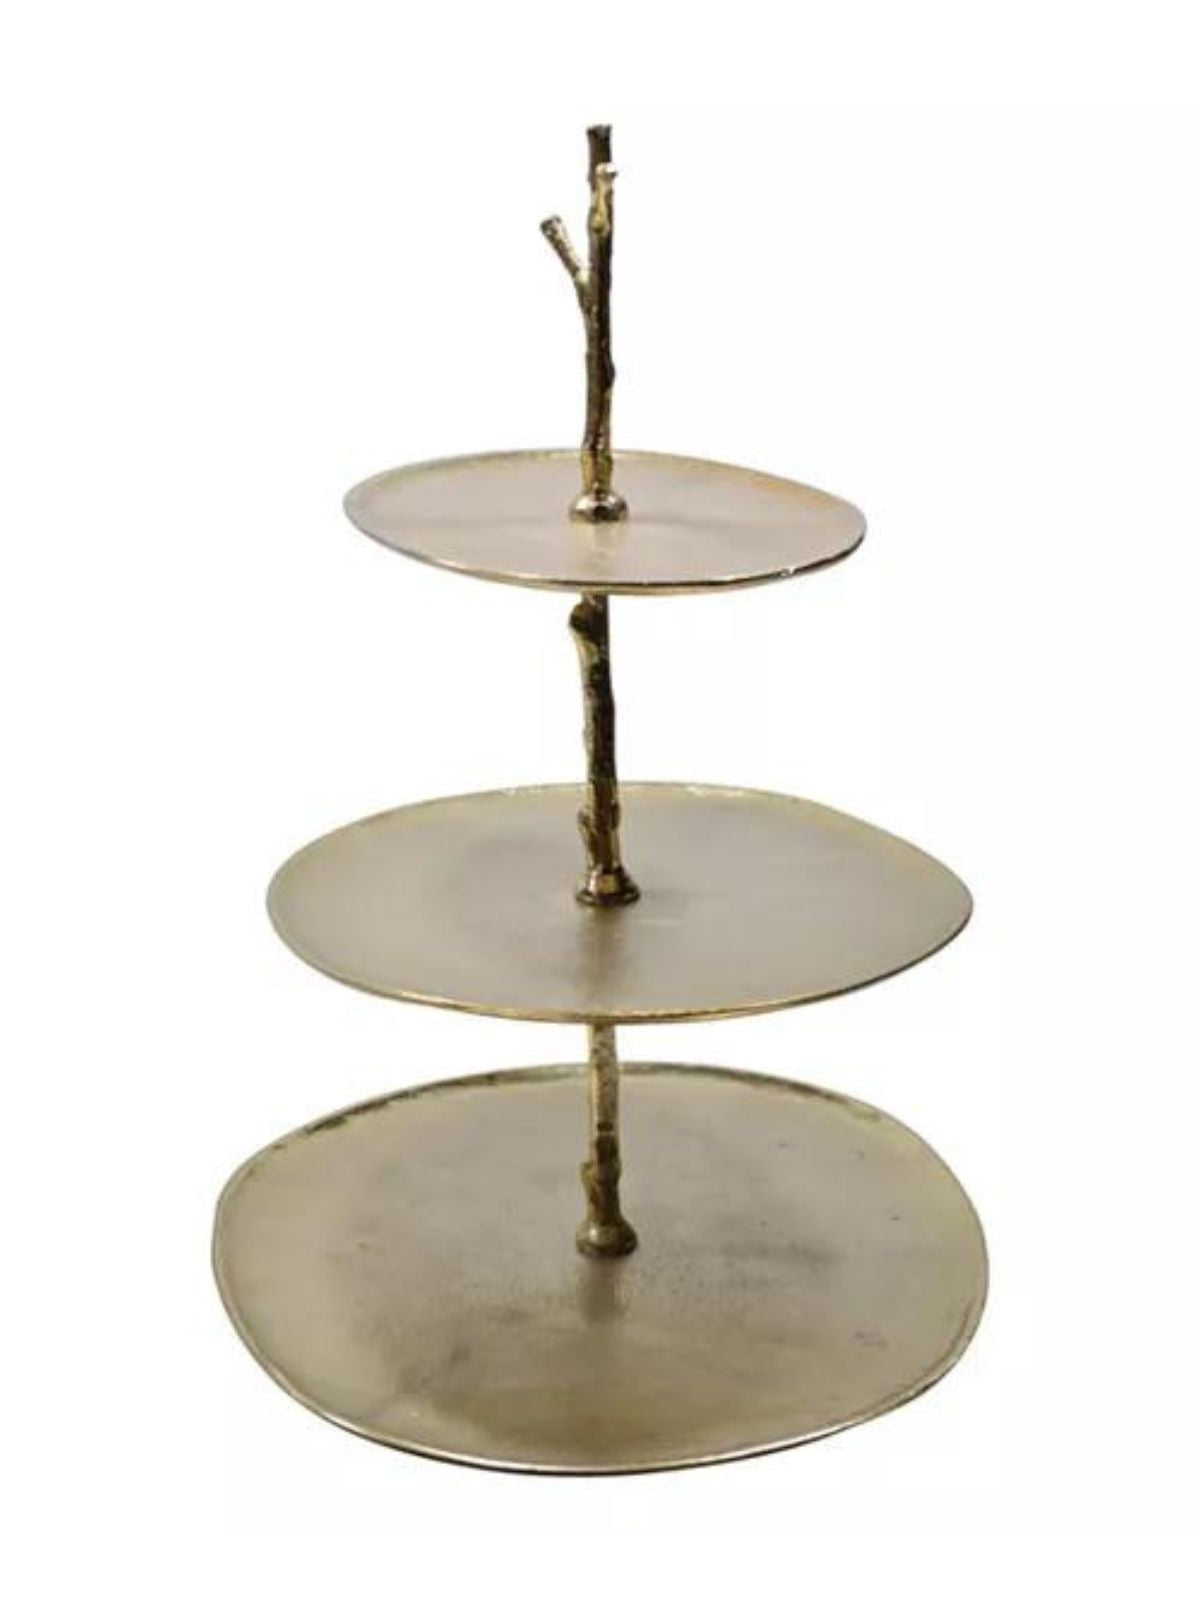 This 3 Tiered gold leaf dish is artfully crafted from quality stainless steel, Sold by KYA Home Decor. 